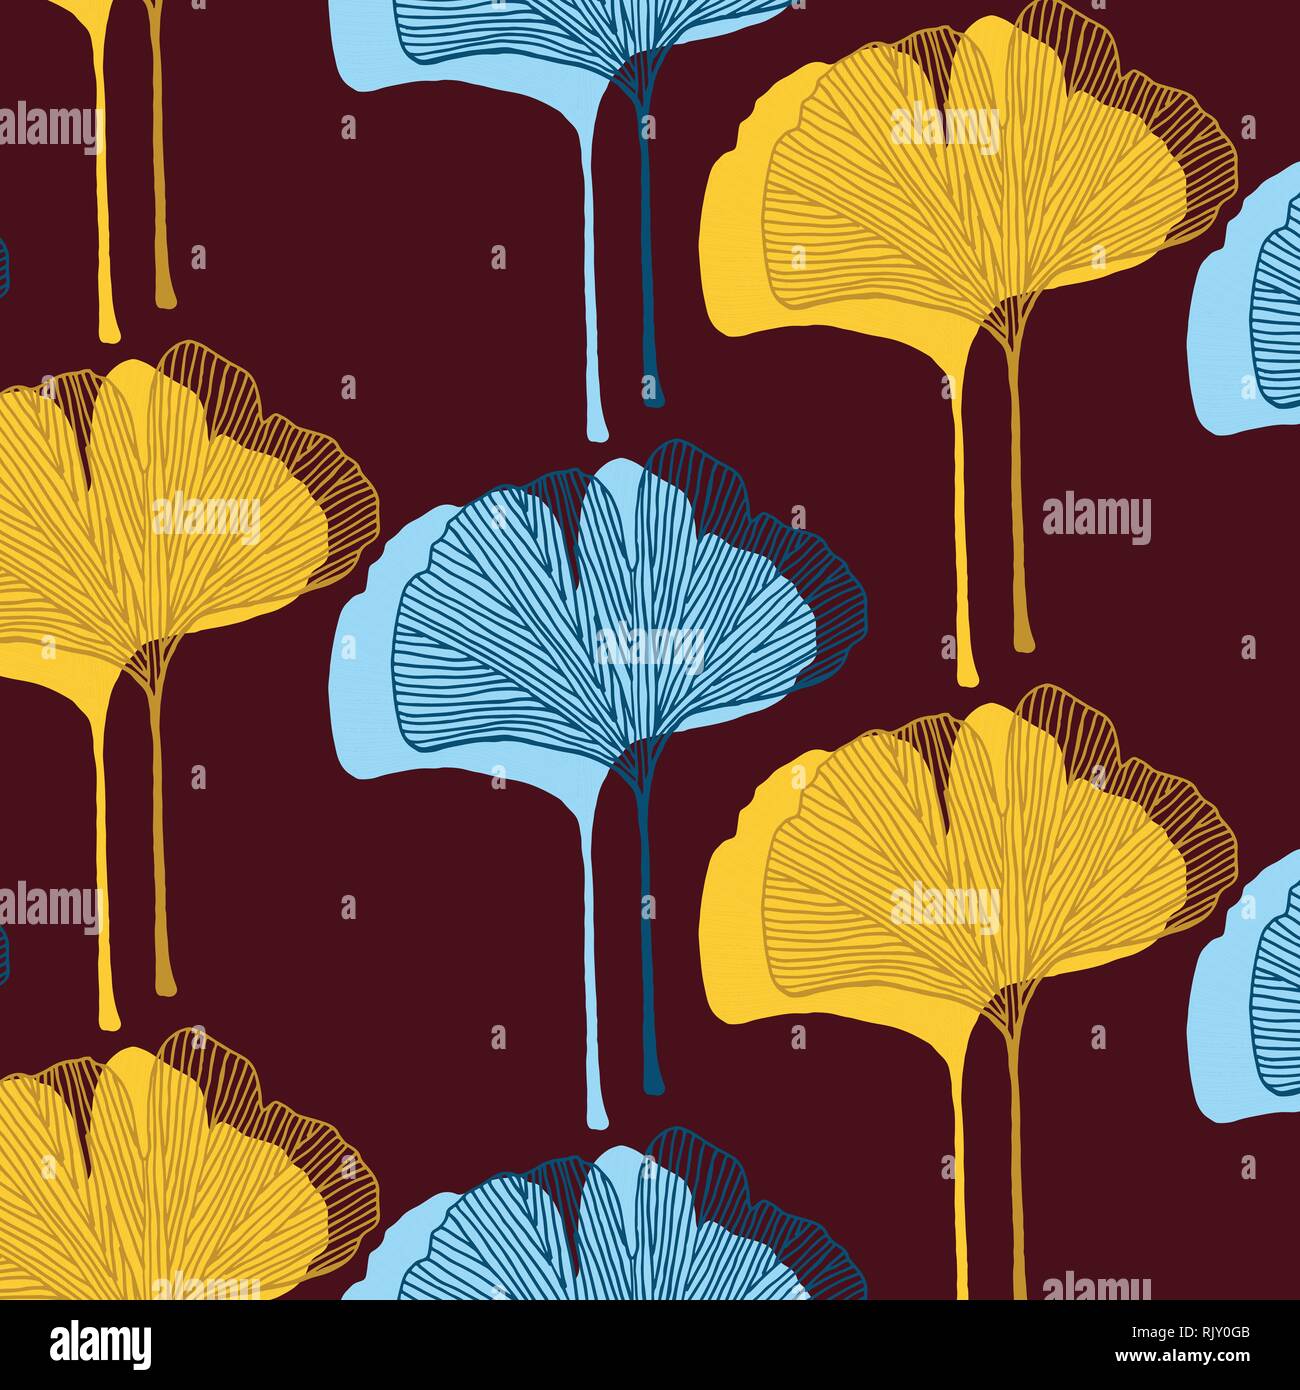 Ginkgo leaves vector pattern in yellow, dark red and blue colors palette Stock Vector